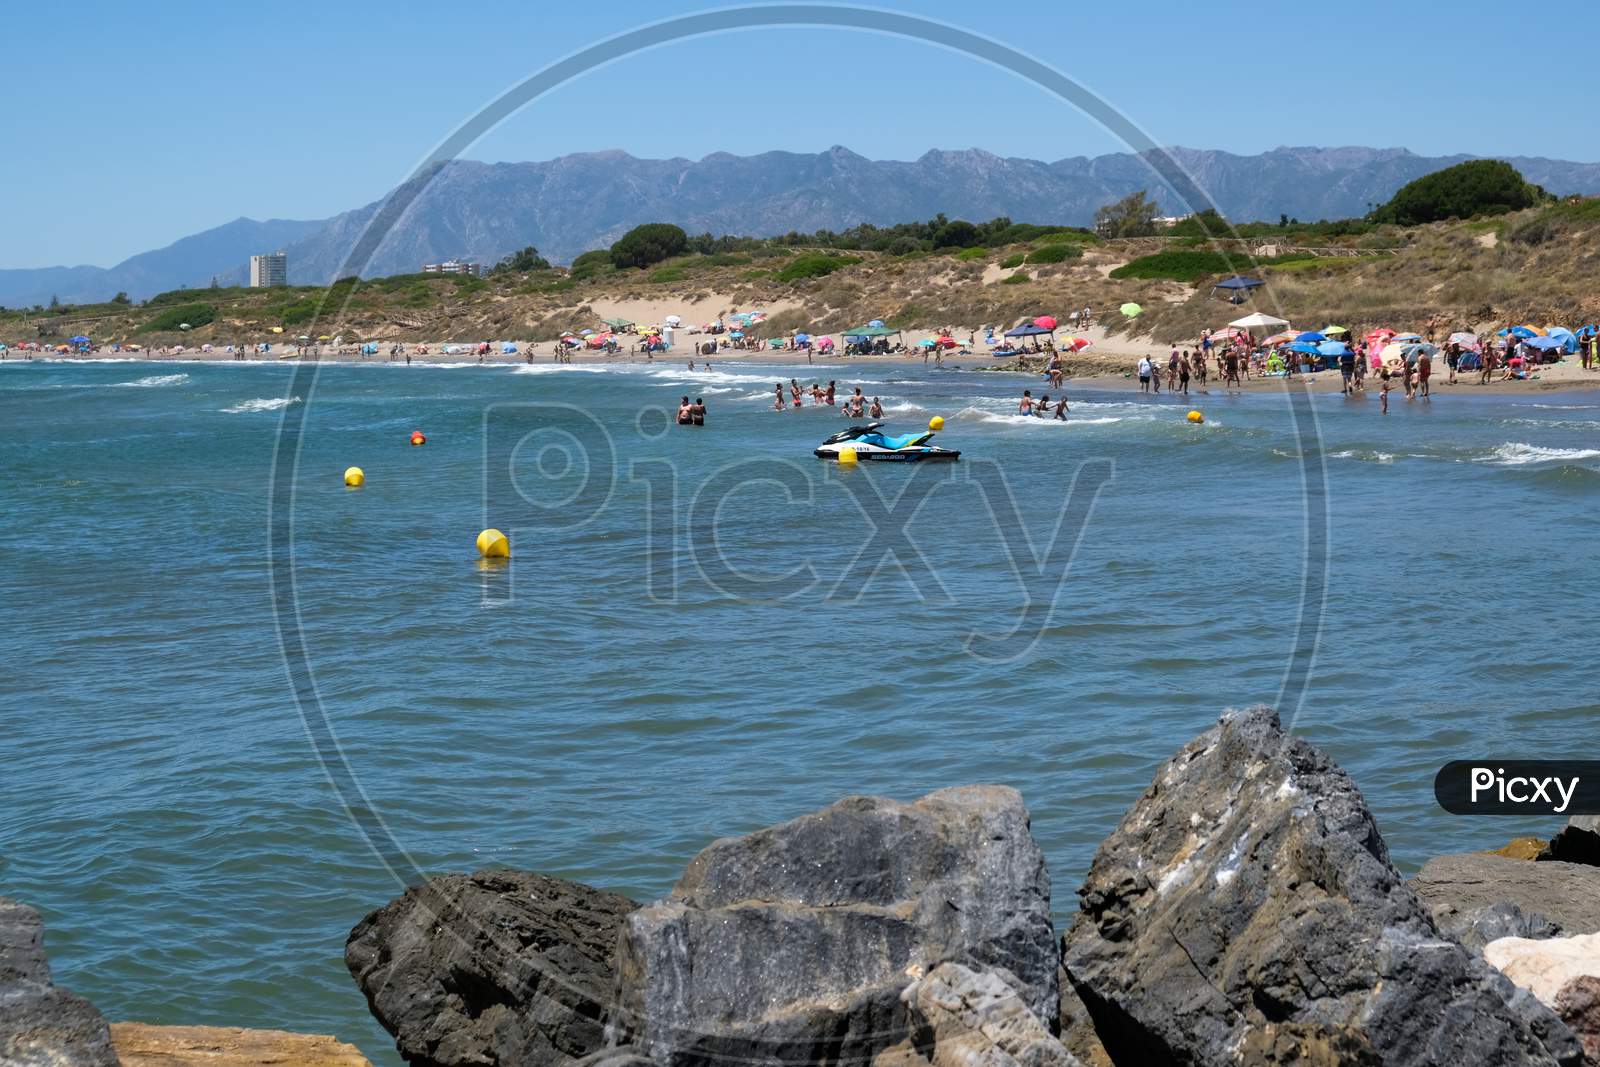 Cabo Pino, Andalucia/Spain - July 2 : People Enjoying The Beach At Cabo Pino Andalucía Spain On July 2, 2017. Unidentified People.